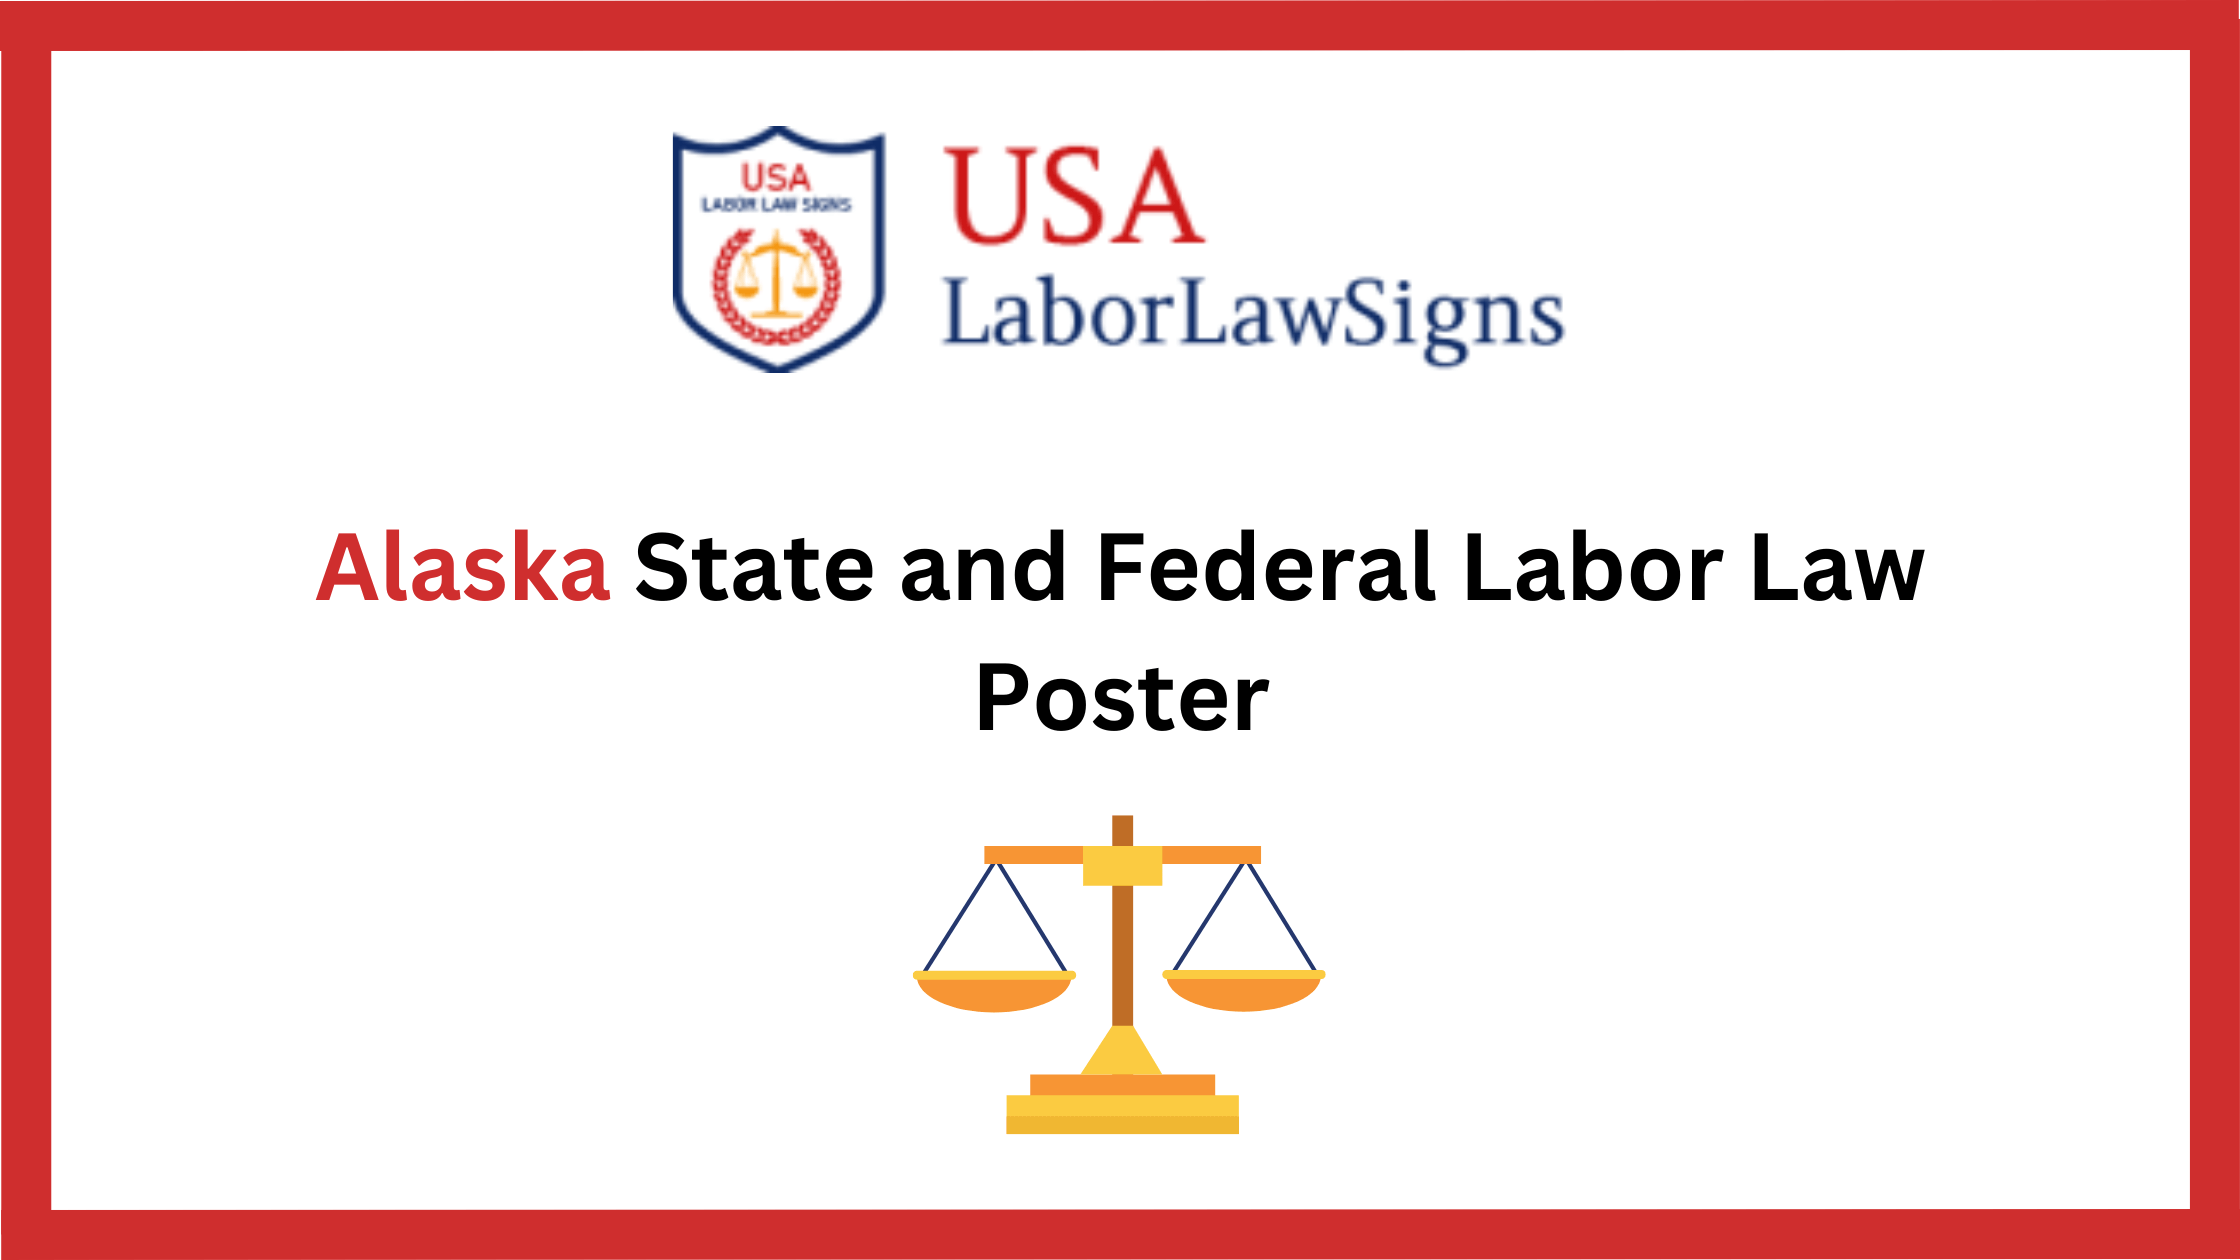 Key Features of Alaska State and Federal Labor Law Poster